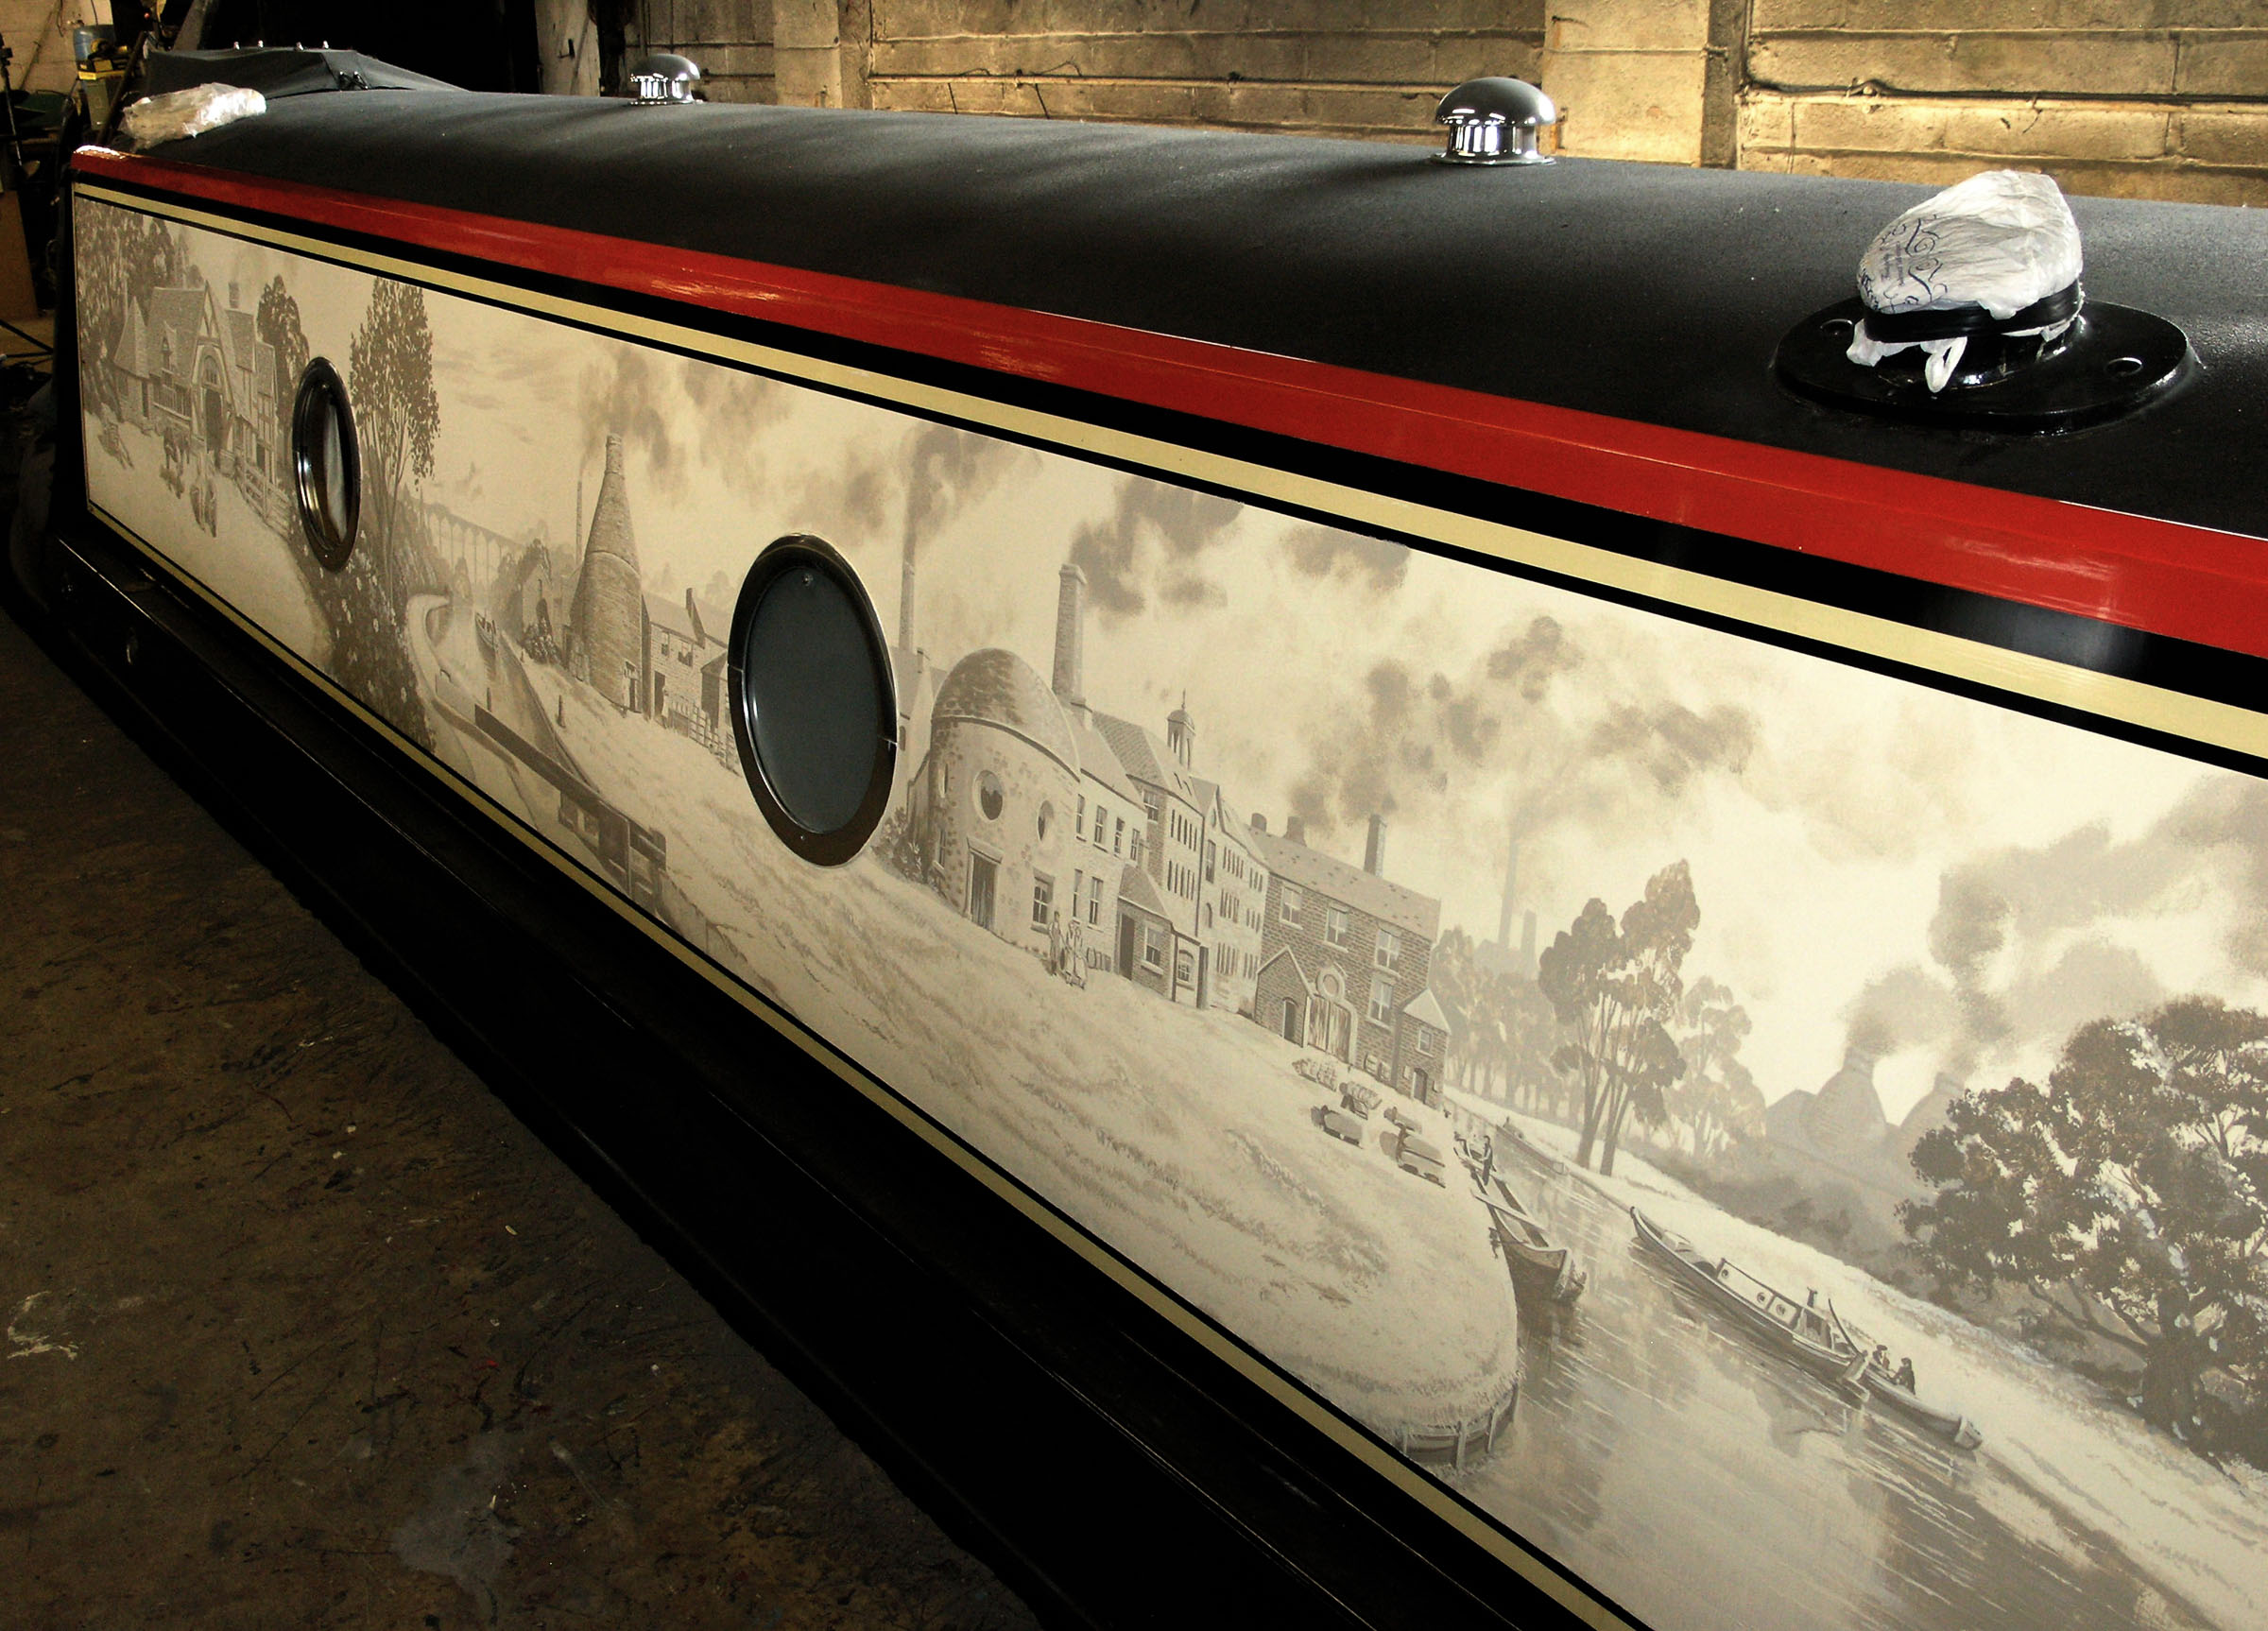 Front left hand side of the narrow boat mural